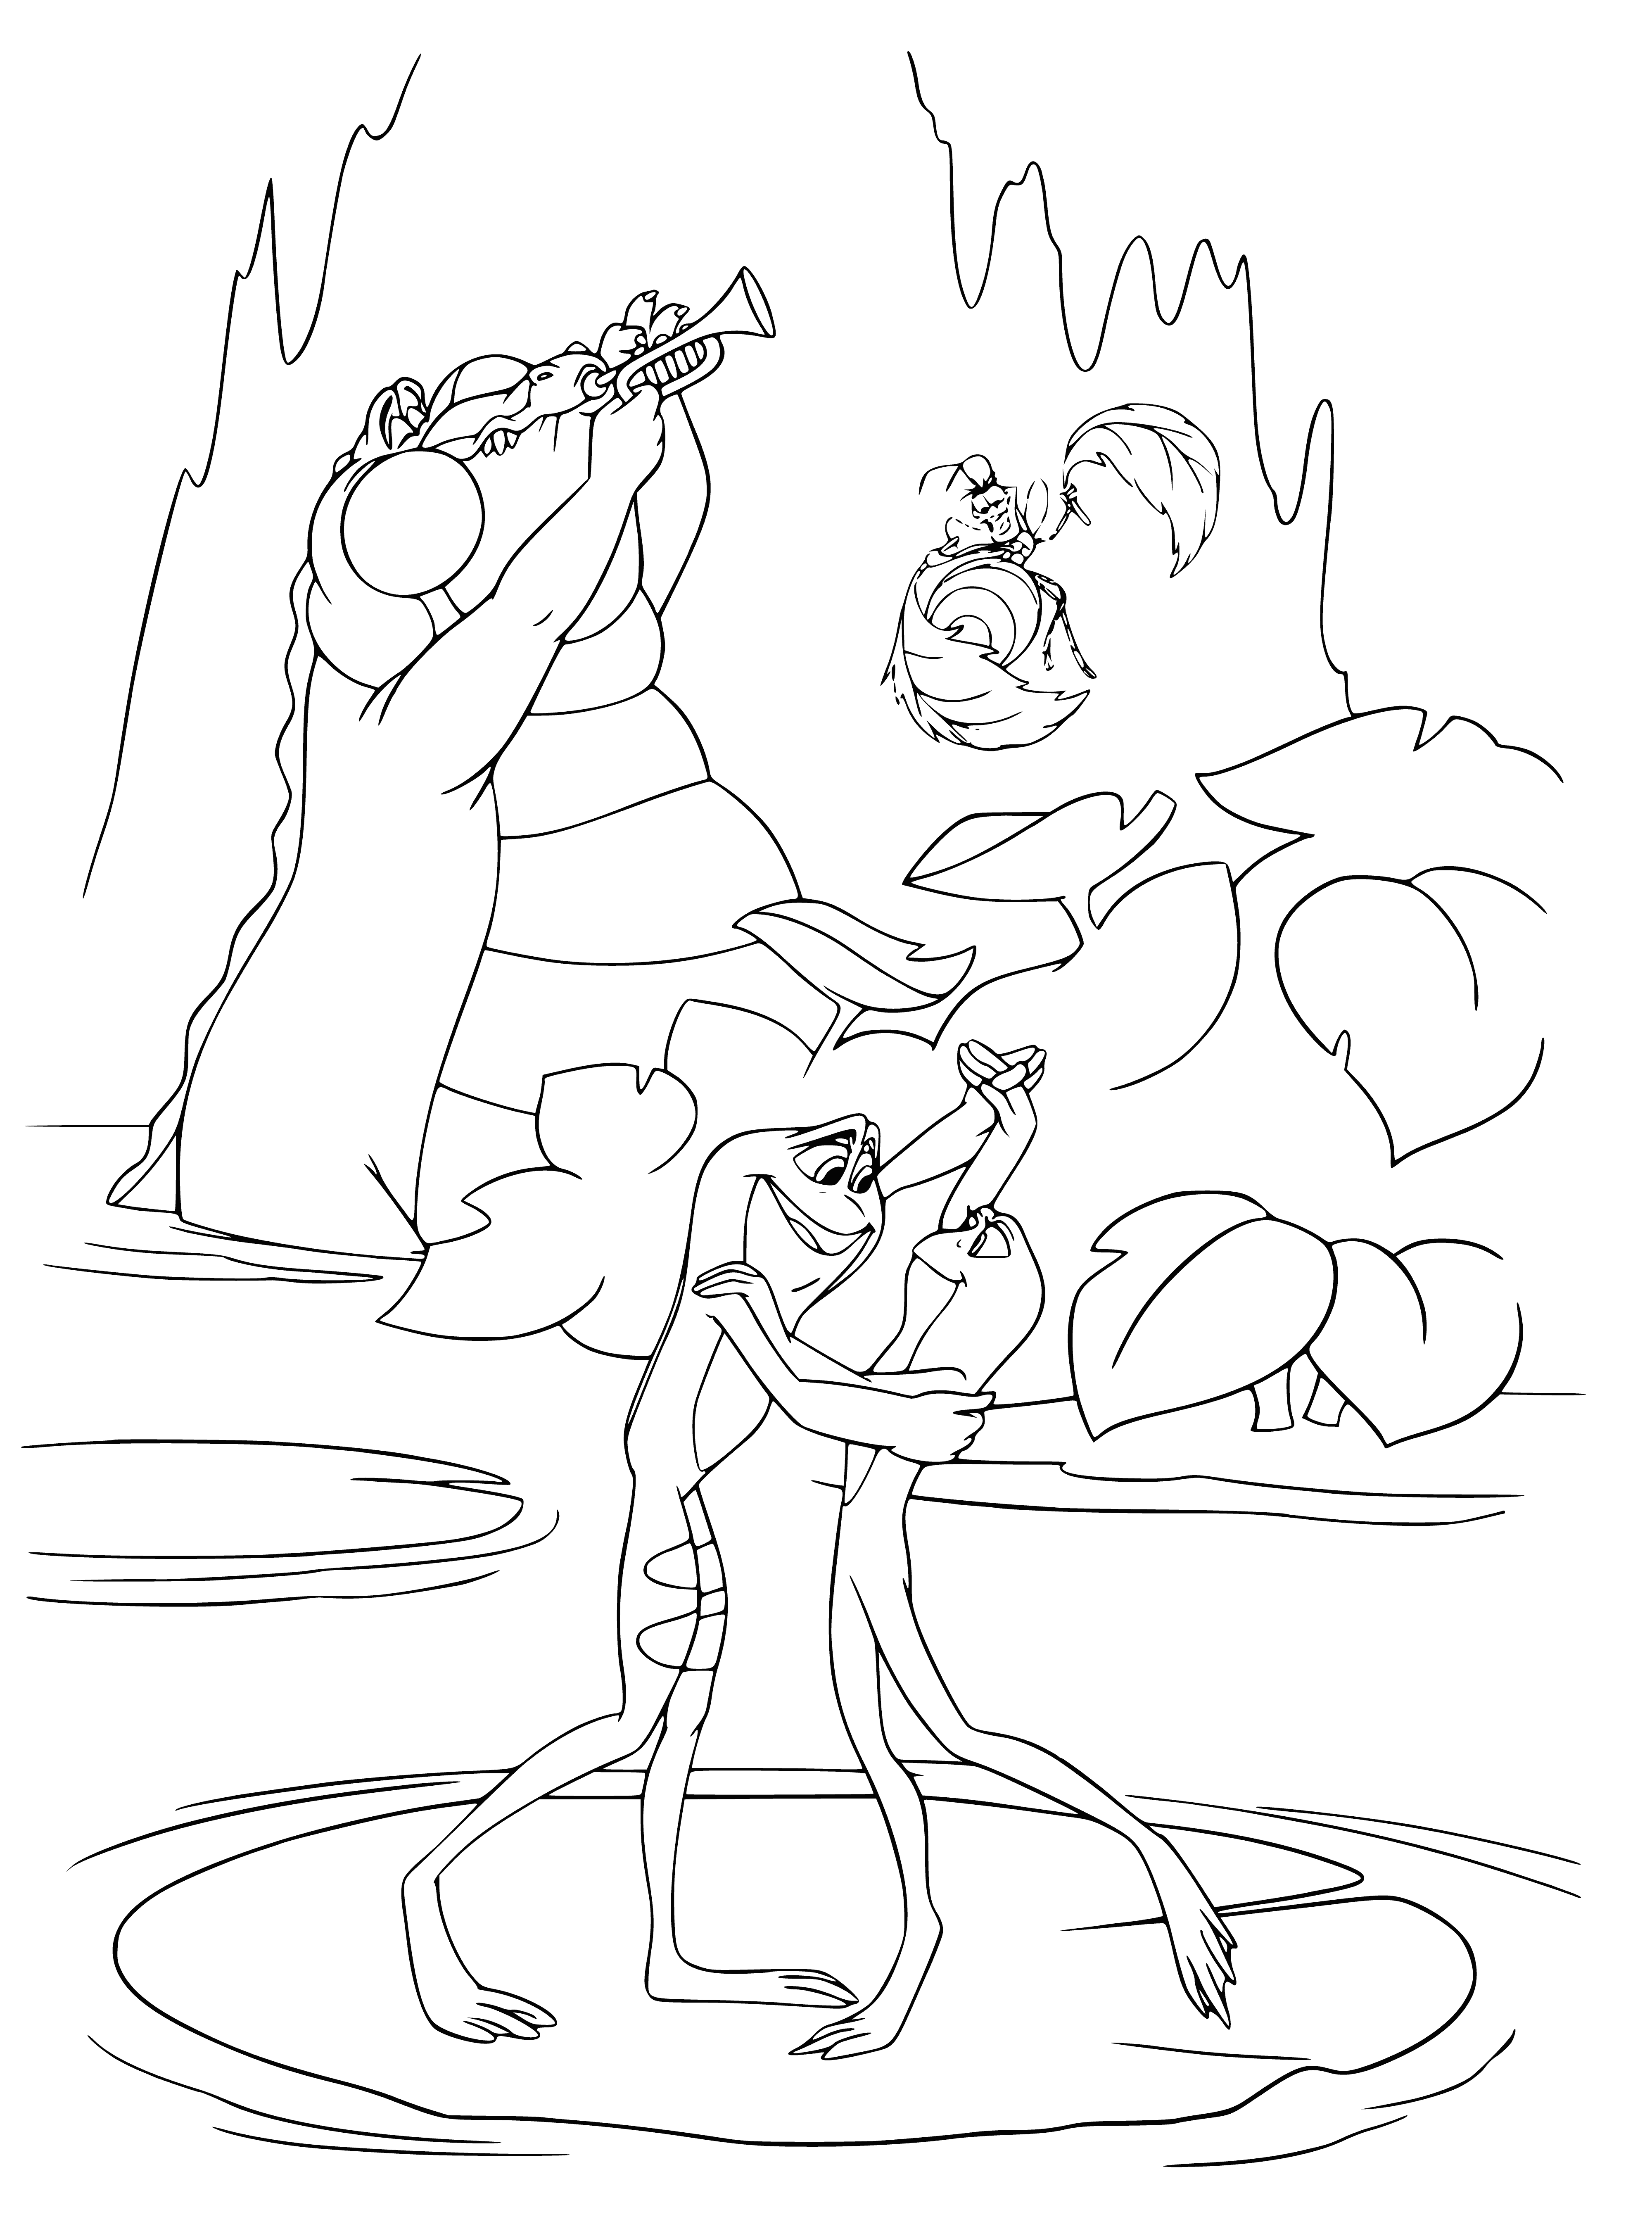 coloring page: Frogs of all sizes dance in a circle, jumping & standing on hind legs with smiles on their faces.